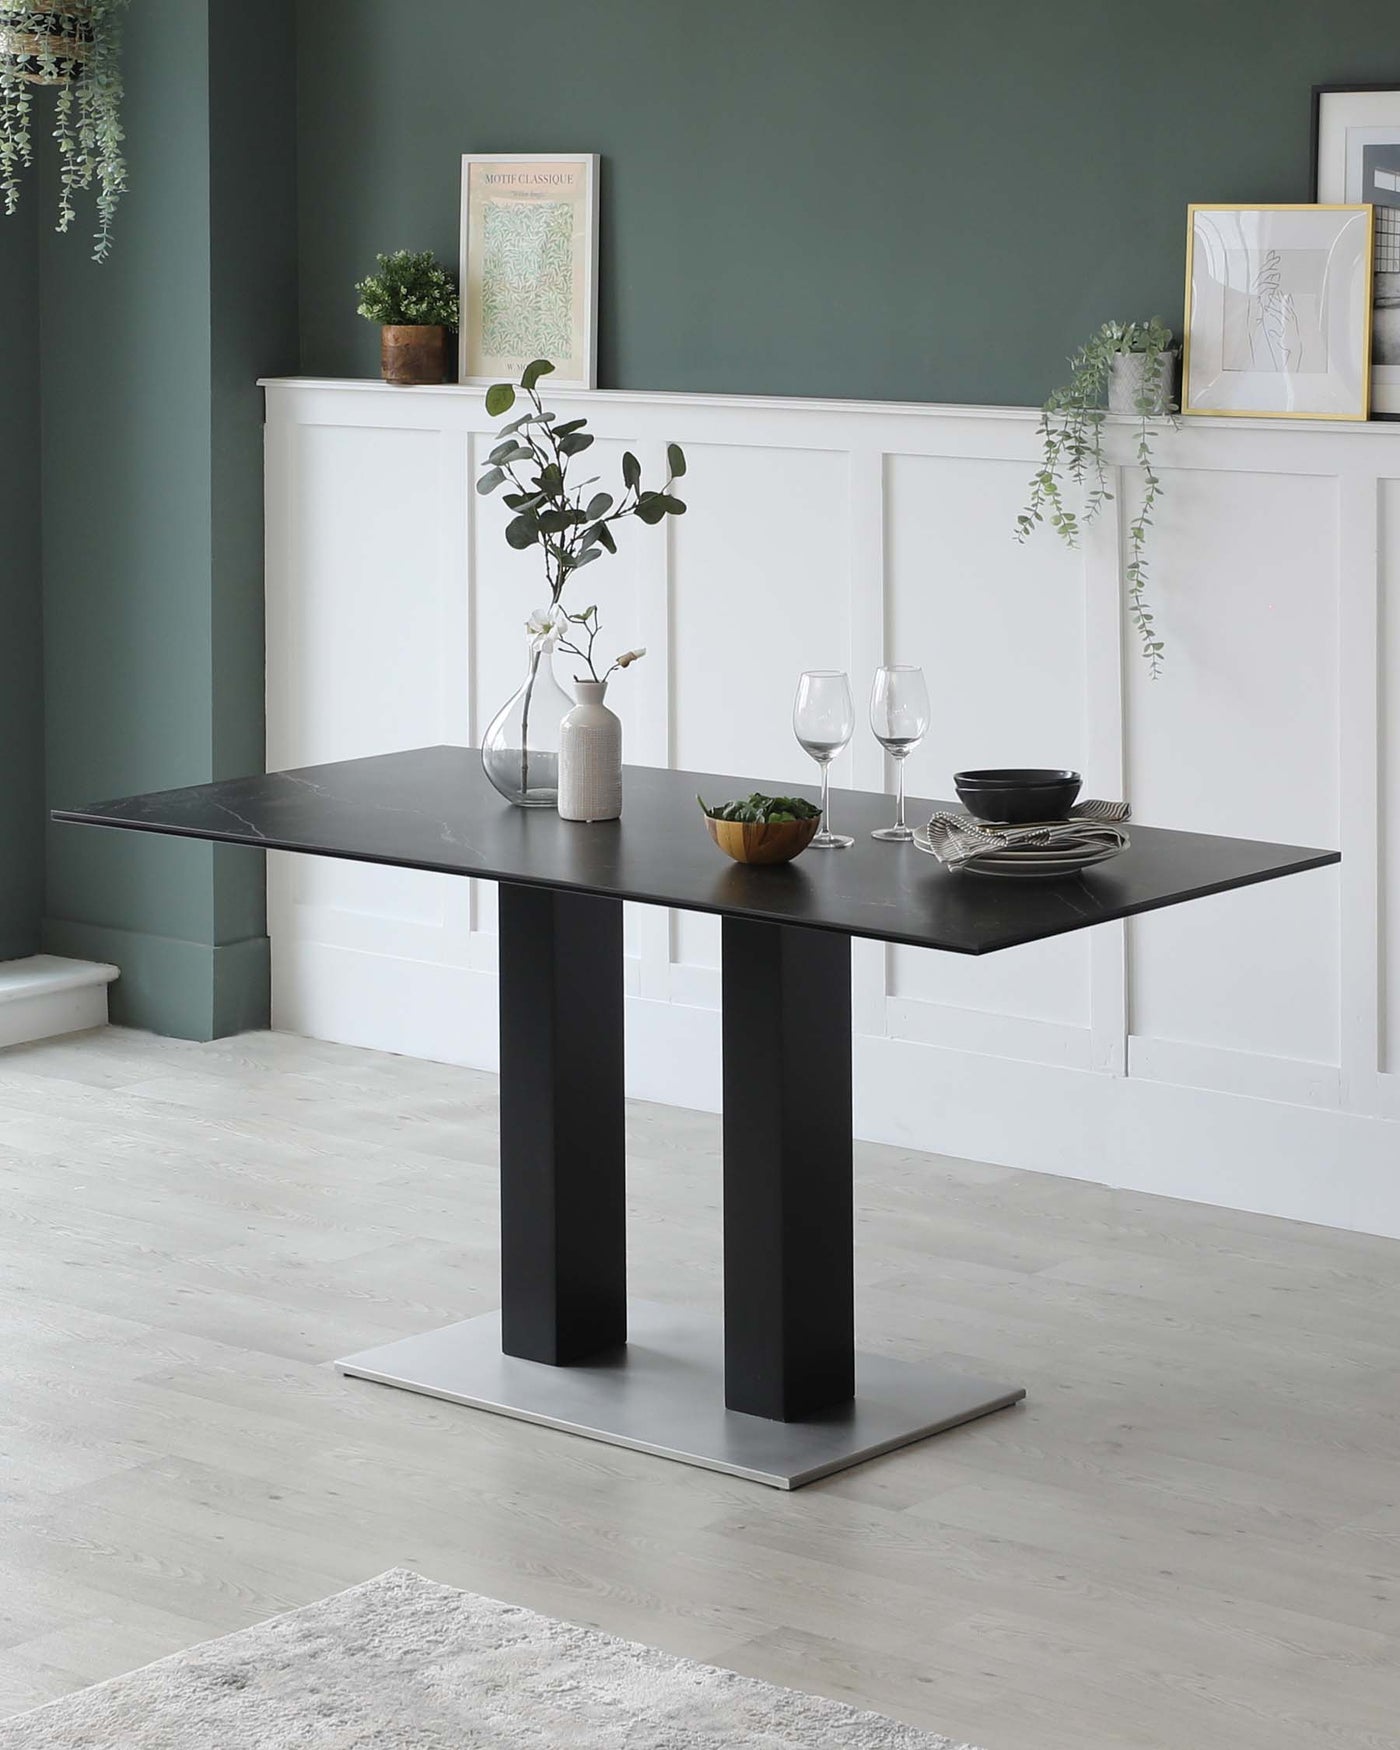 Modern rectangular dining table with a sleek black tabletop supported by two wide, vertical slab legs in a matte black finish, set upon a flat, brushed metal base. The table is staged with simple dinnerware, a textured vase holding eucalyptus branches, and paired with a neutral-toned room decor.